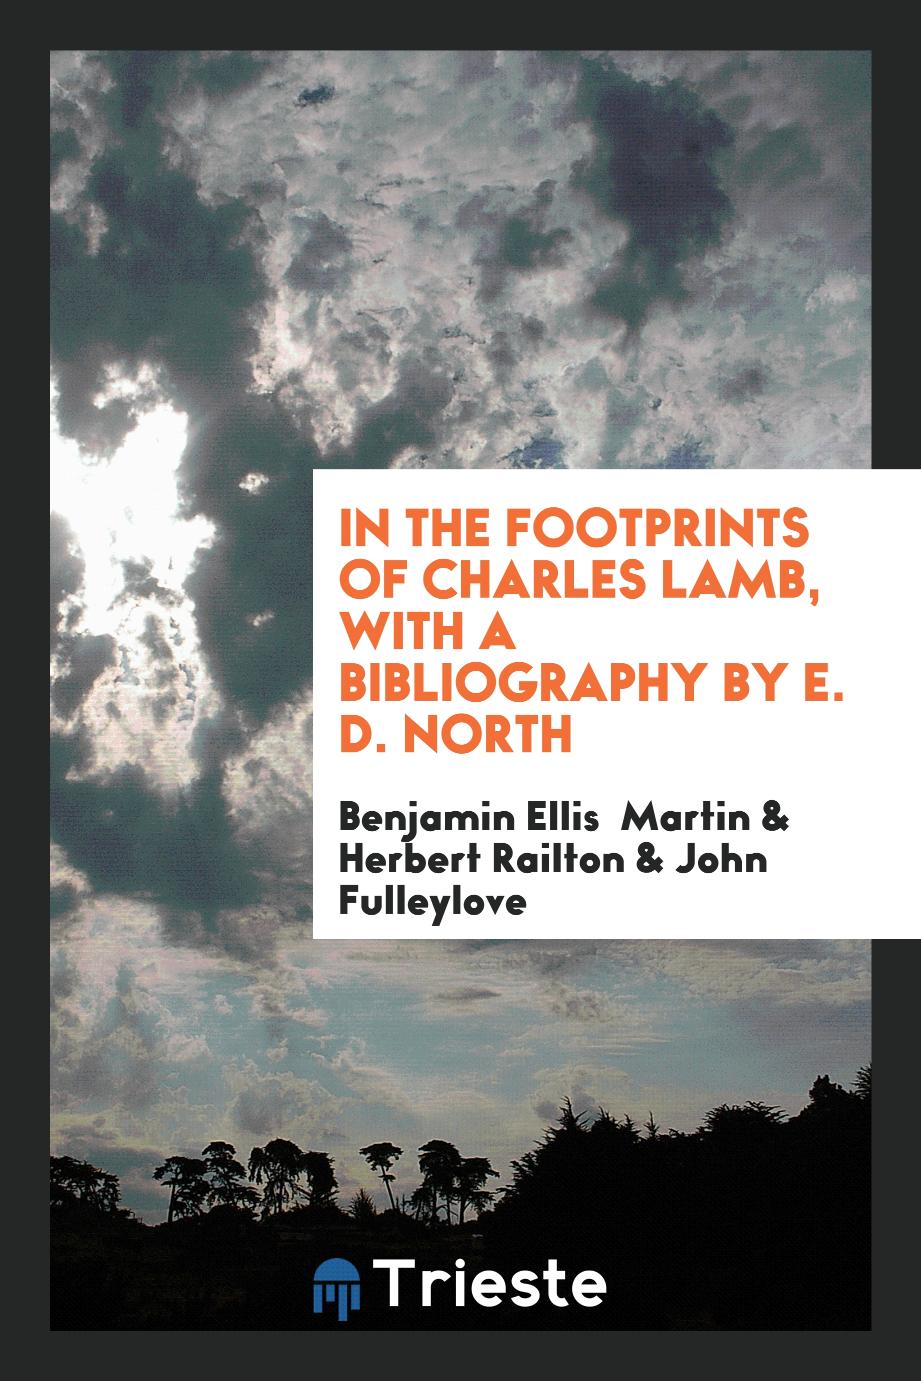 In the Footprints of Charles Lamb, with a Bibliography by E. D. North